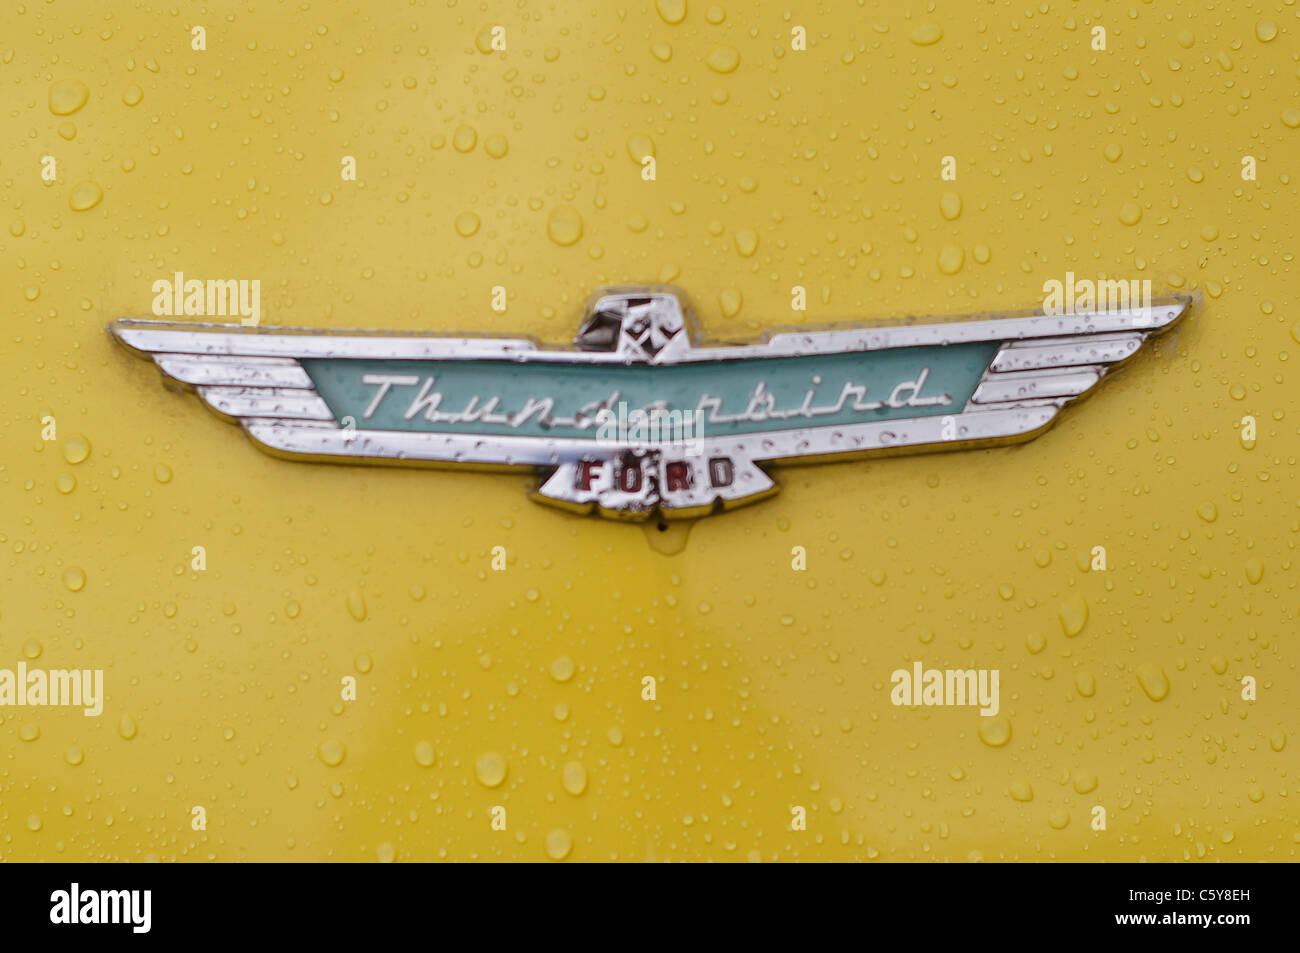 Thunderbird American classic car chrome emblem shot on a yellow bonnet/hood, speckled with water droplets Stock Photo